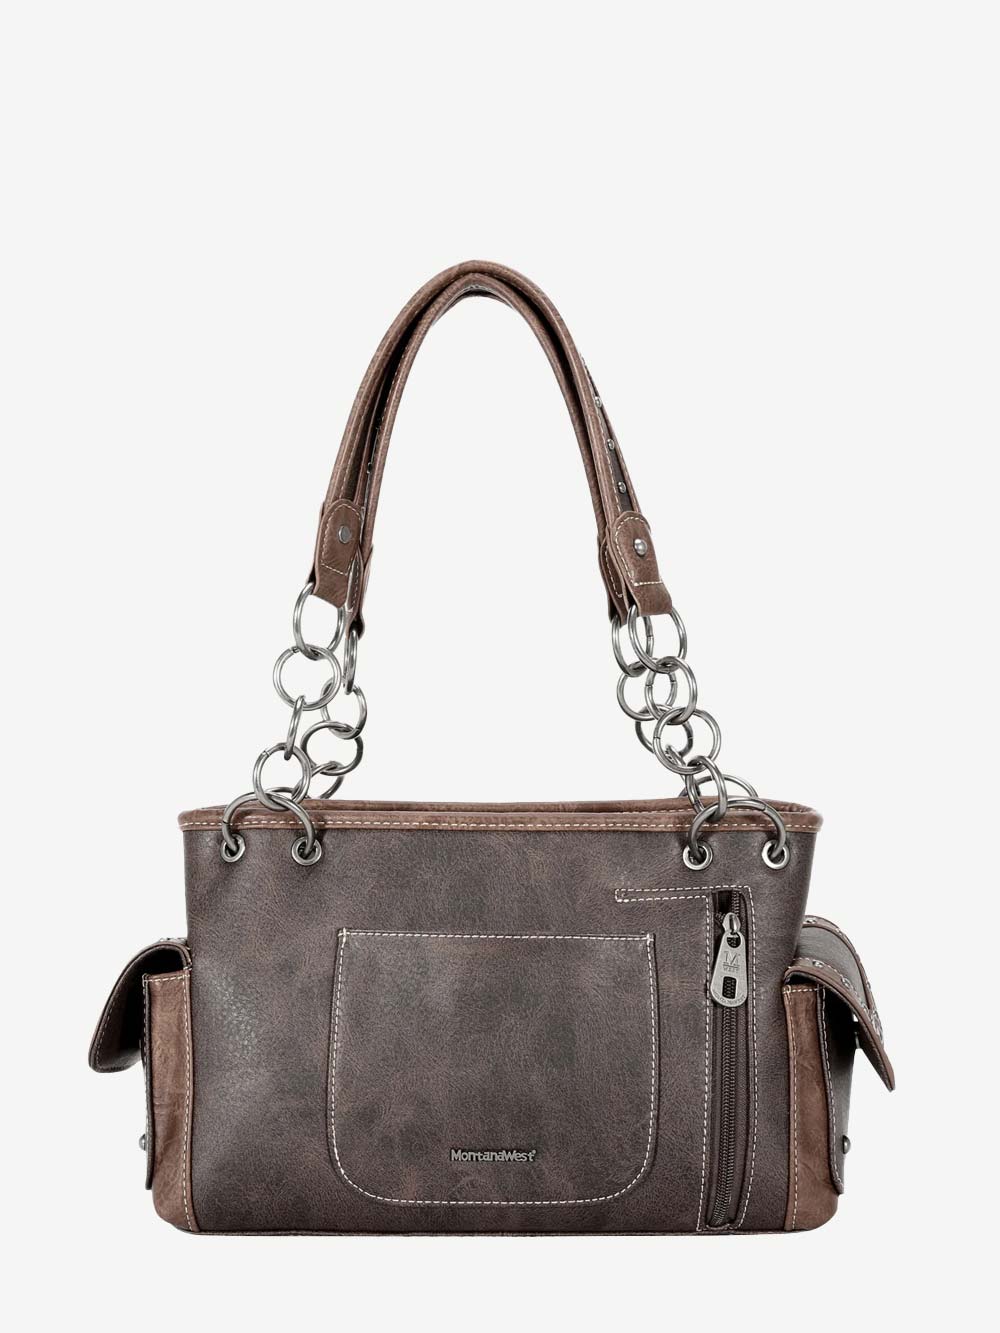 Montana West Cut-Out Boot Scroll Concealed Carry Satchel - Montana West World